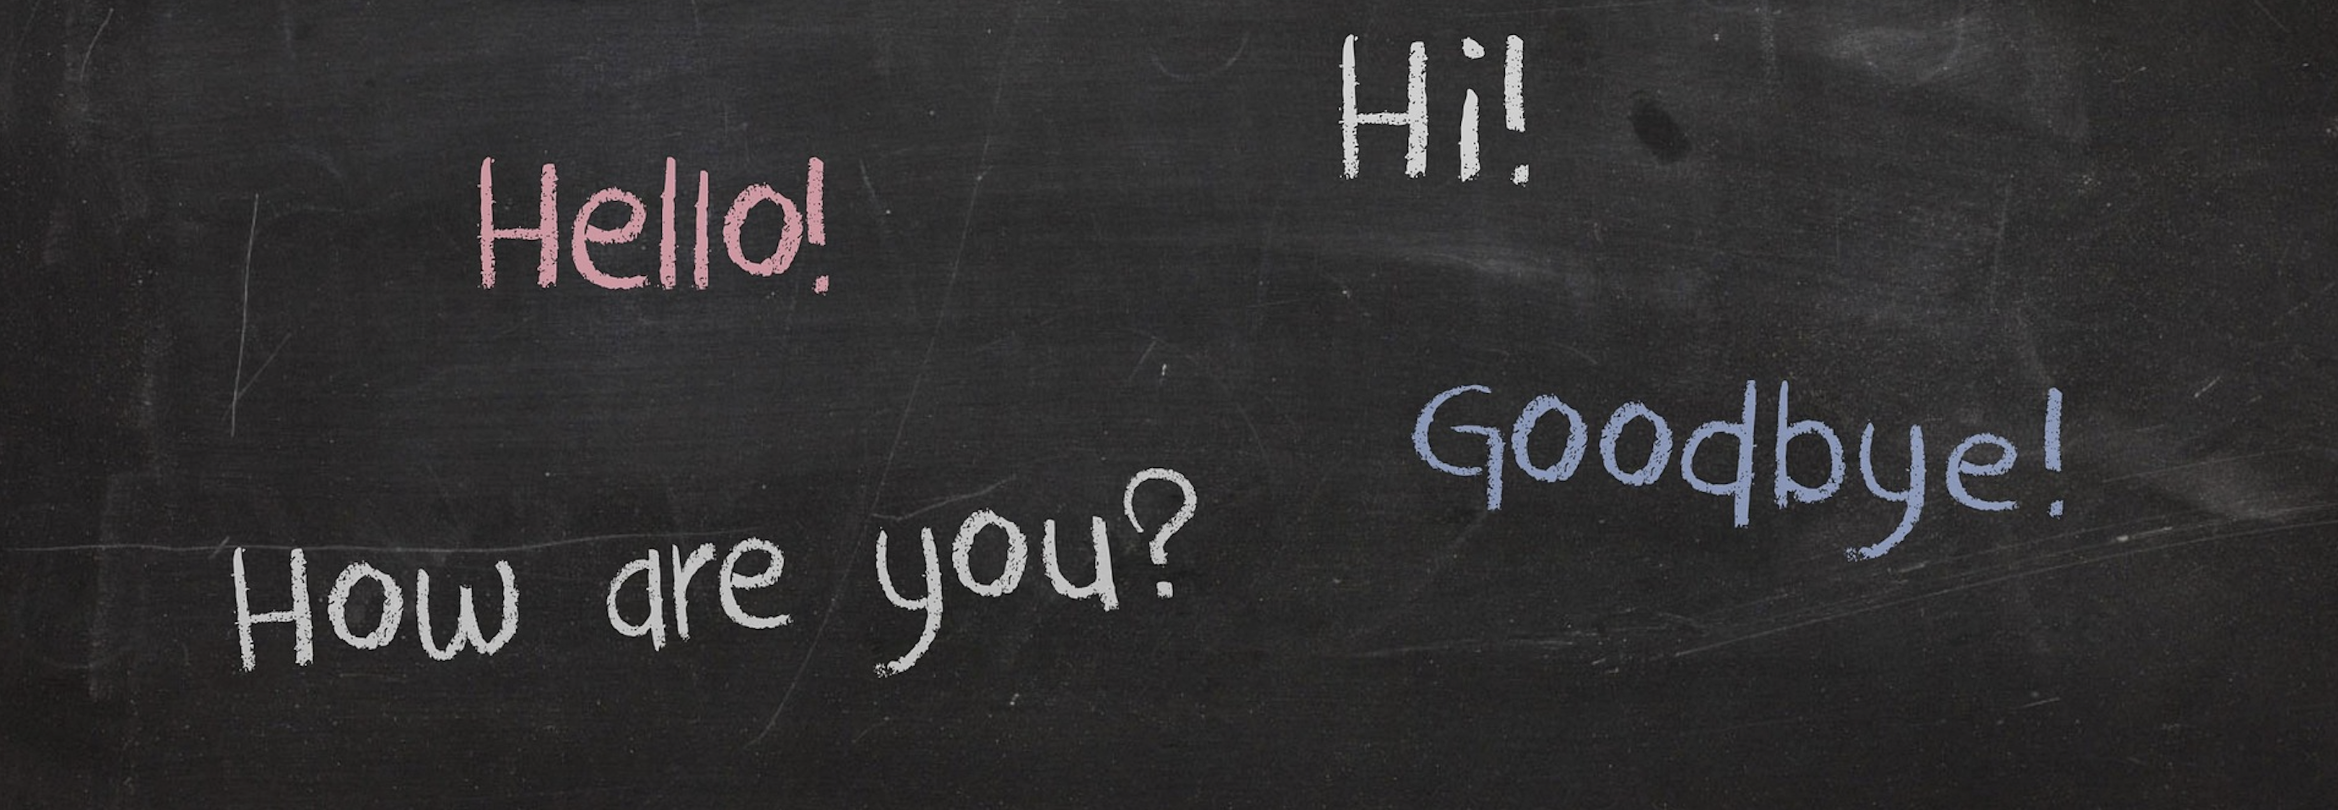 Blackboard with Hello, Hi, How are you? written on it